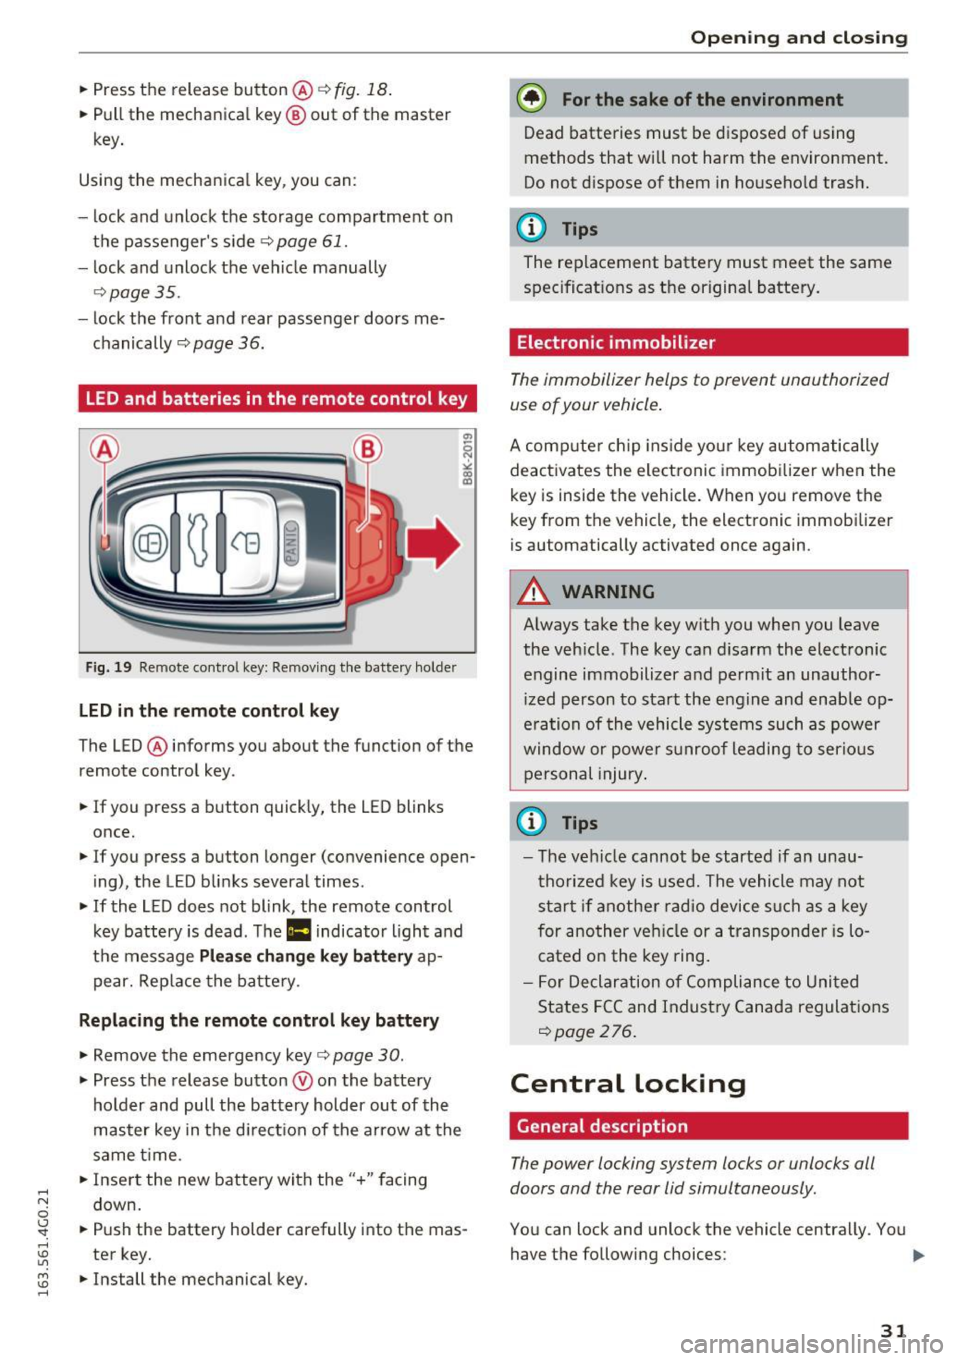 AUDI A6 2016  Owners Manual .... N 
0 CJ <I: .... I.Cl U"I 
M I.Cl ...... 
.. Press  the  release button@ c::> fig.  18. 
.. Pull  the  mechanical  key @ out  of  the  master 
key. 
Using  the mechanical  key , you  can: 
- loc